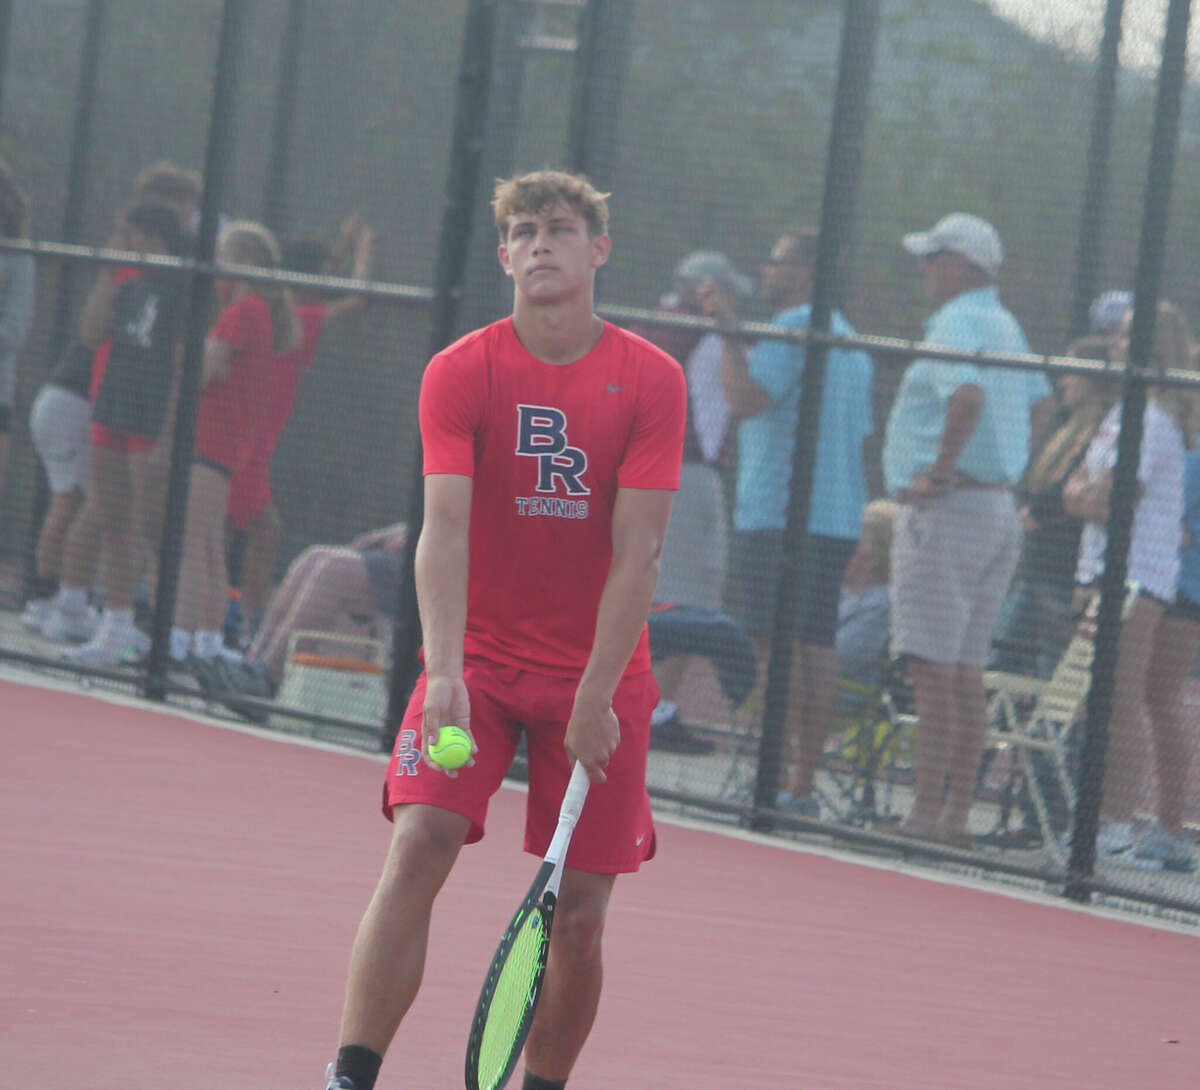 Big Rapids' No. 2 singles tennis player Nate Sanders gets ready to serve against Holland Christian on Thursday.